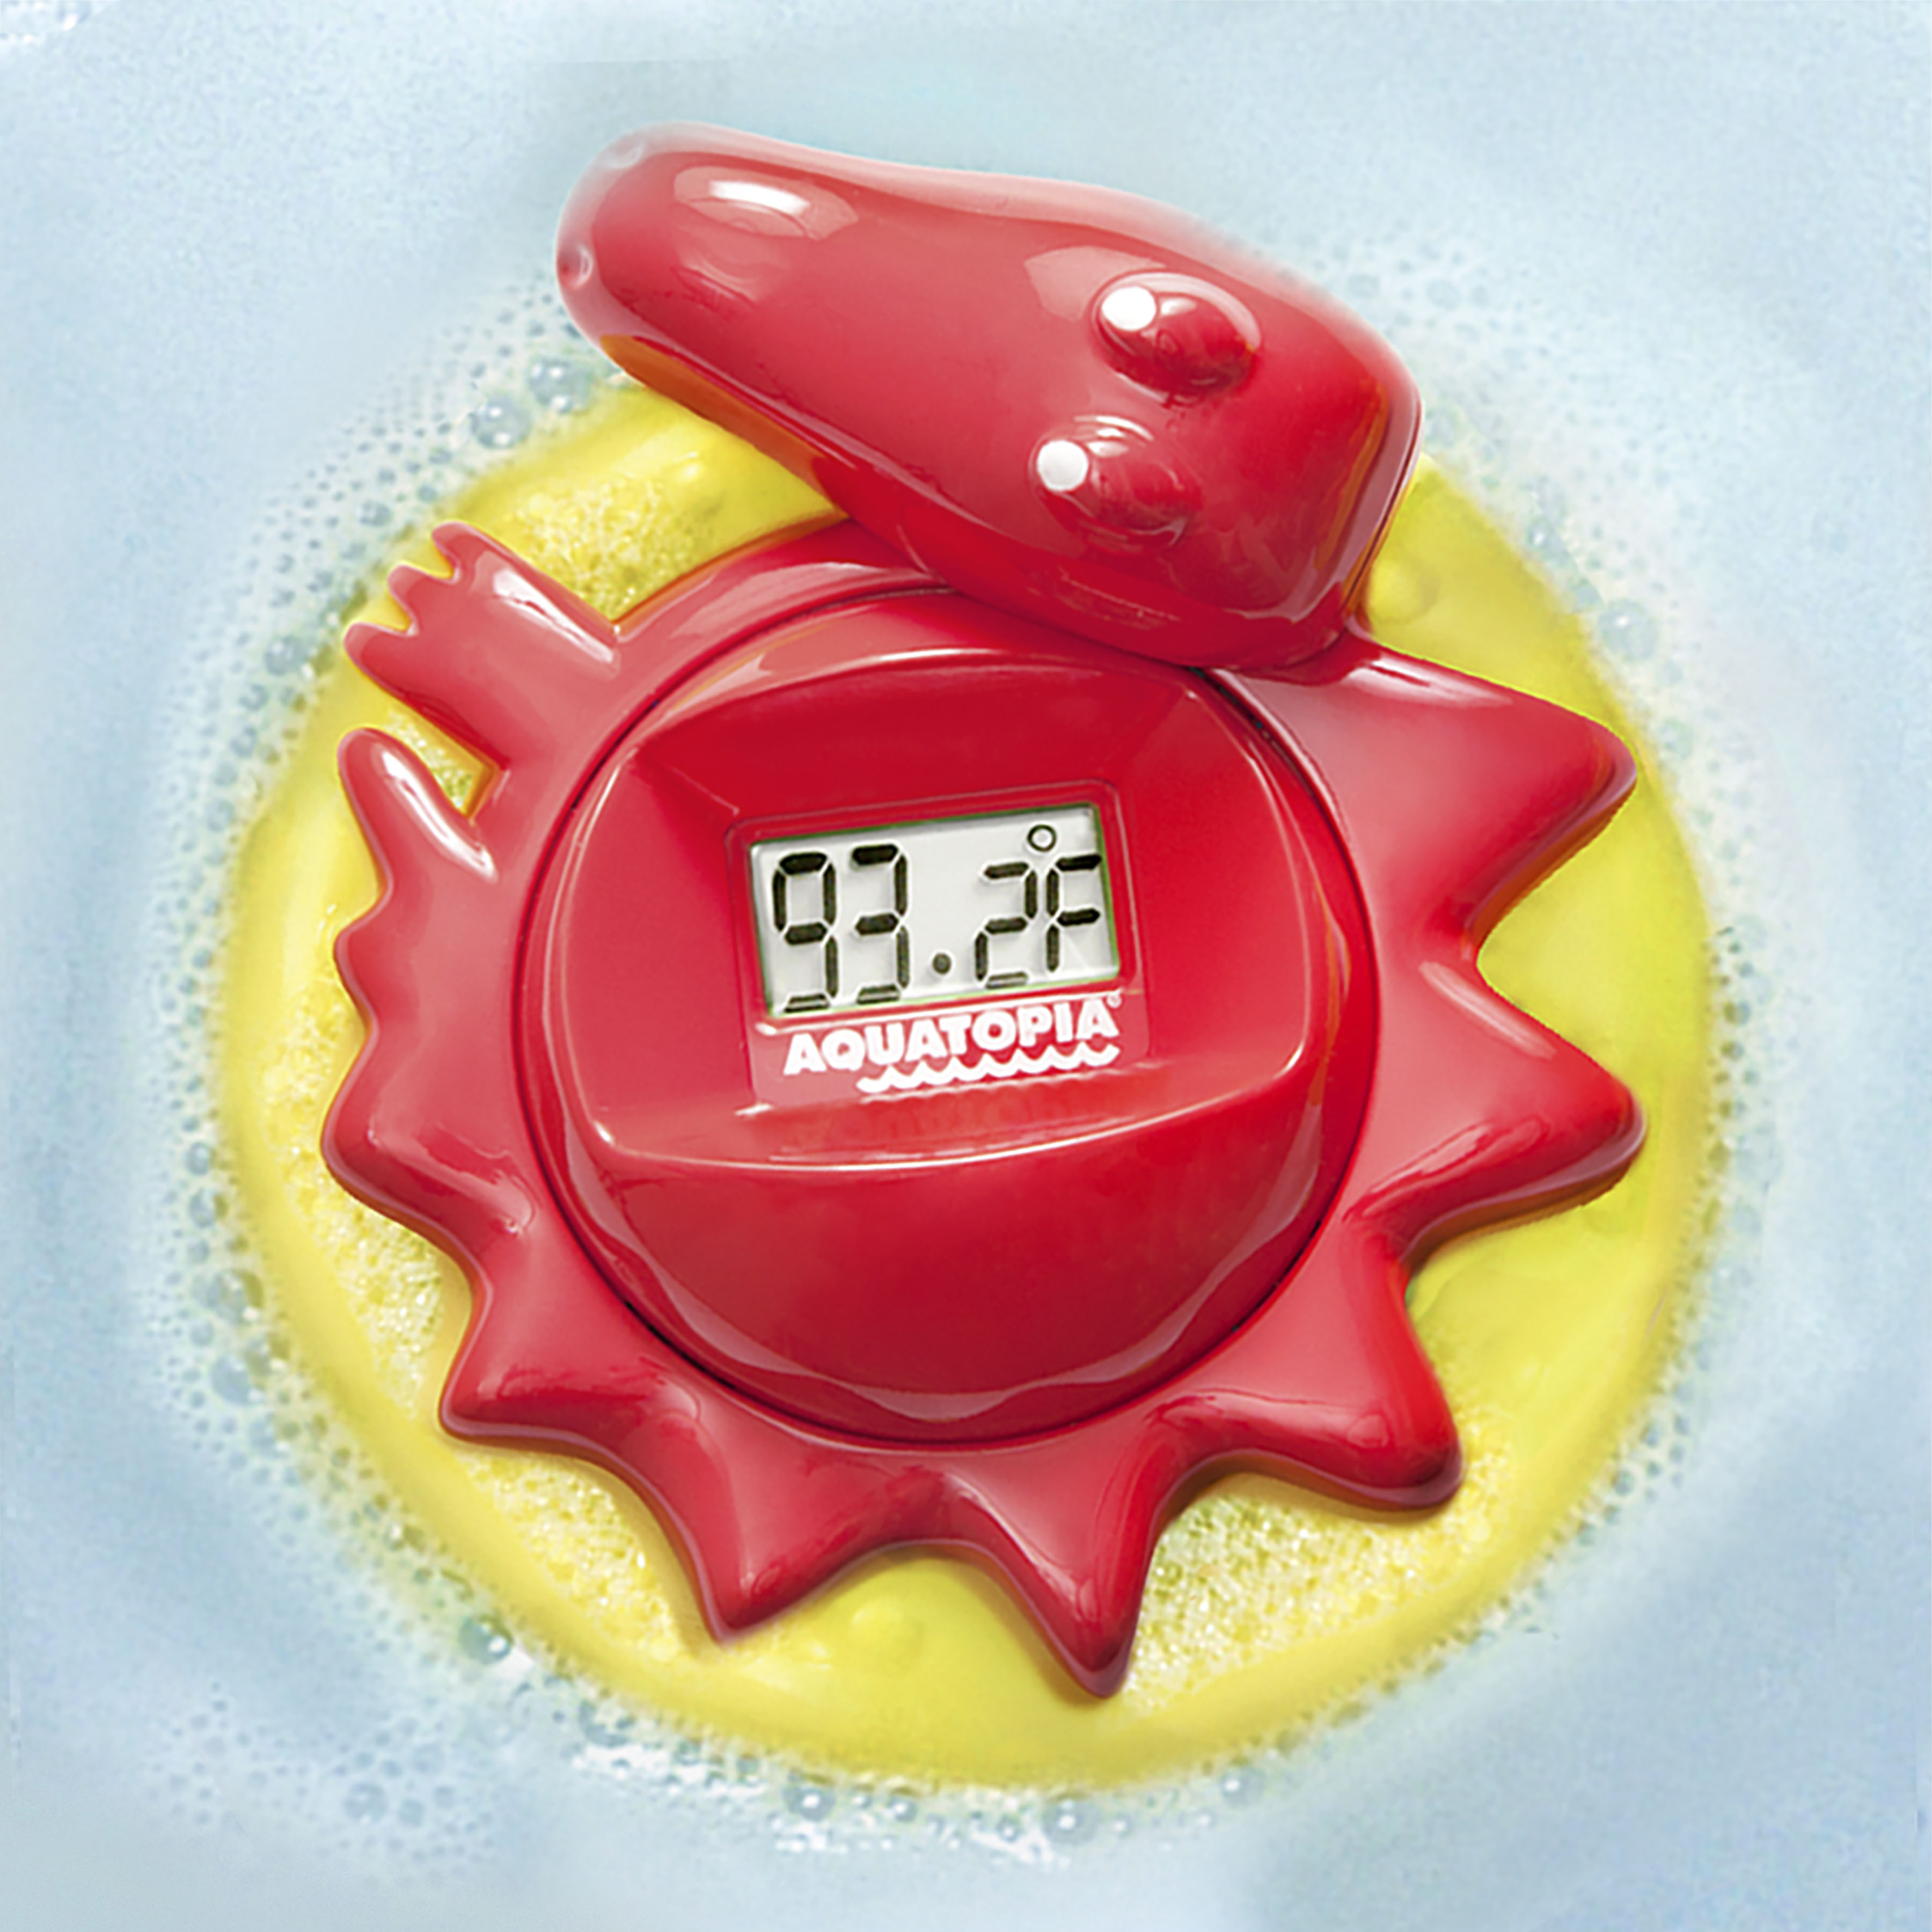 Aquatopia Safety Bath Thermometer with Digital Audible Alarm, Red - image 5 of 6